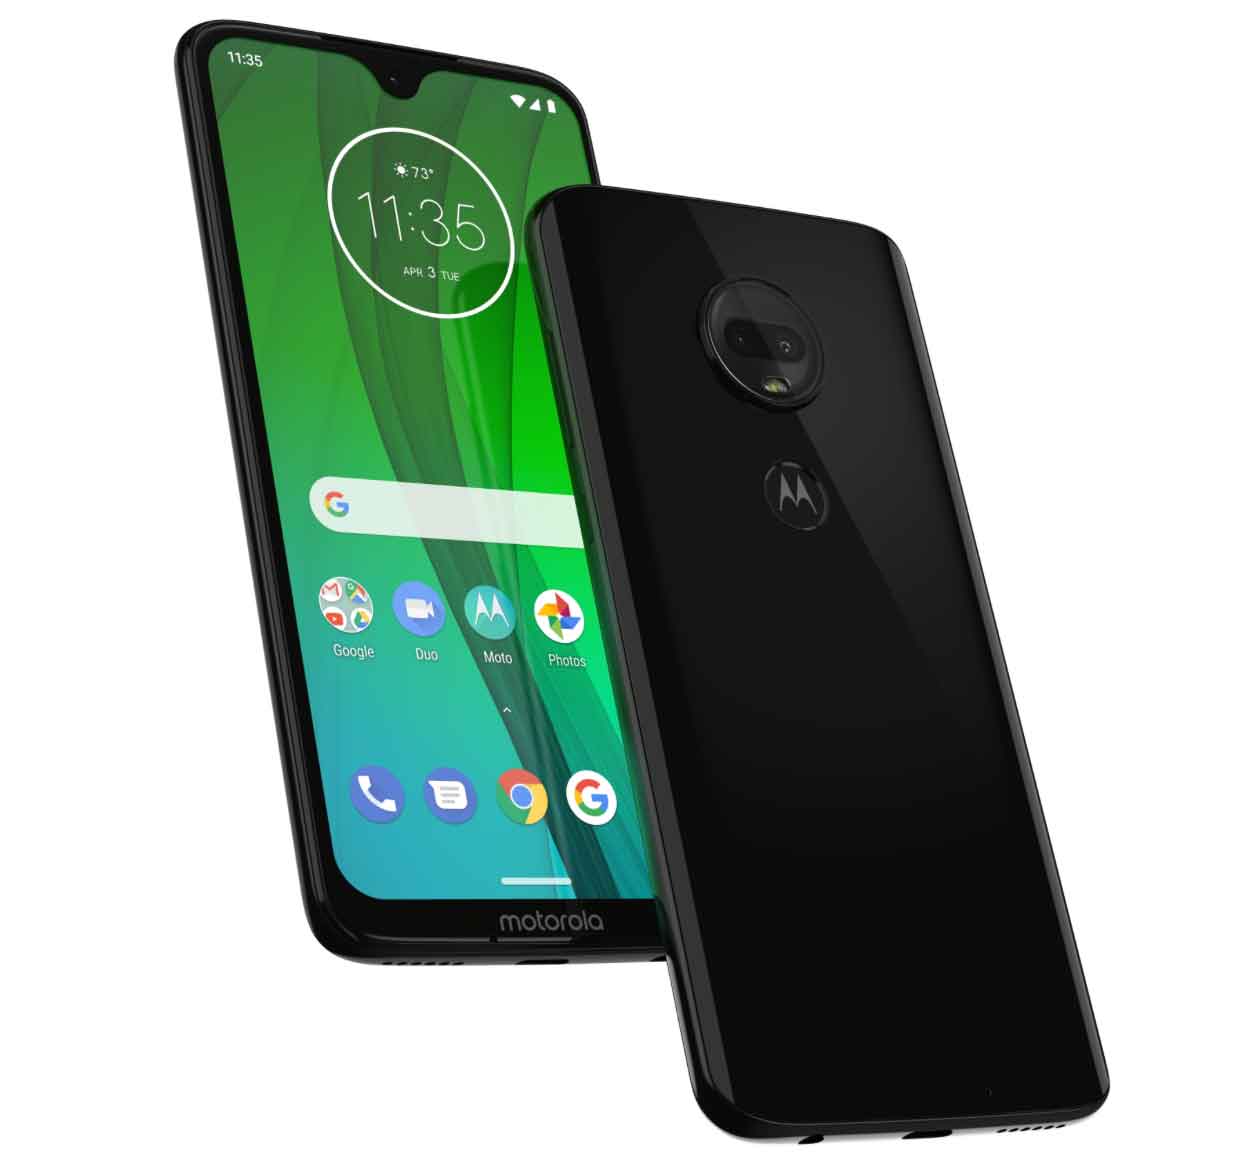 Motorola Moto G7, Power, and Play price, release date, and